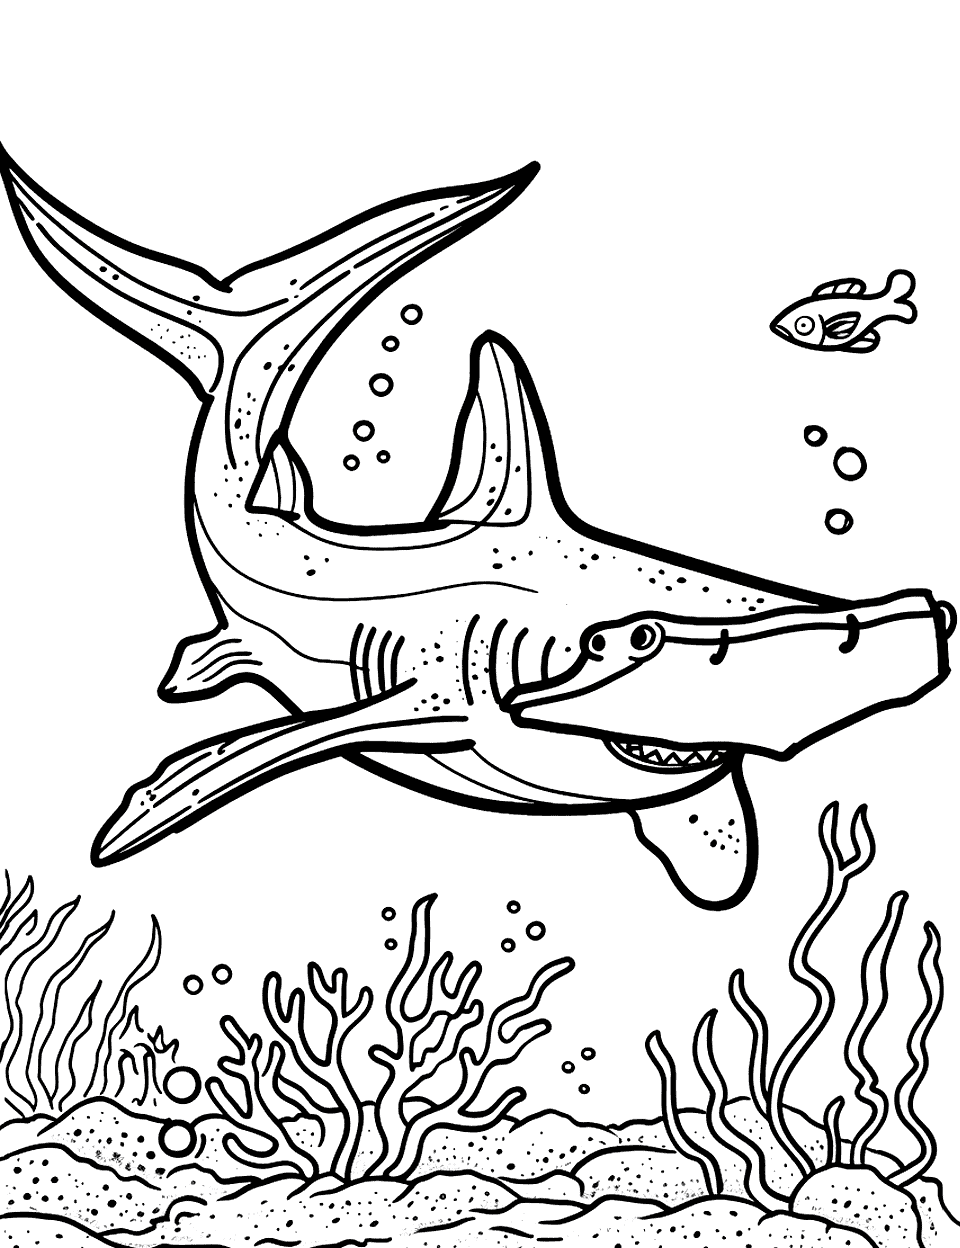 Hammerhead Shark Surveying the Seafloor Sea Creature Coloring Page - A hammerhead shark scanning the seabed while coasting along.